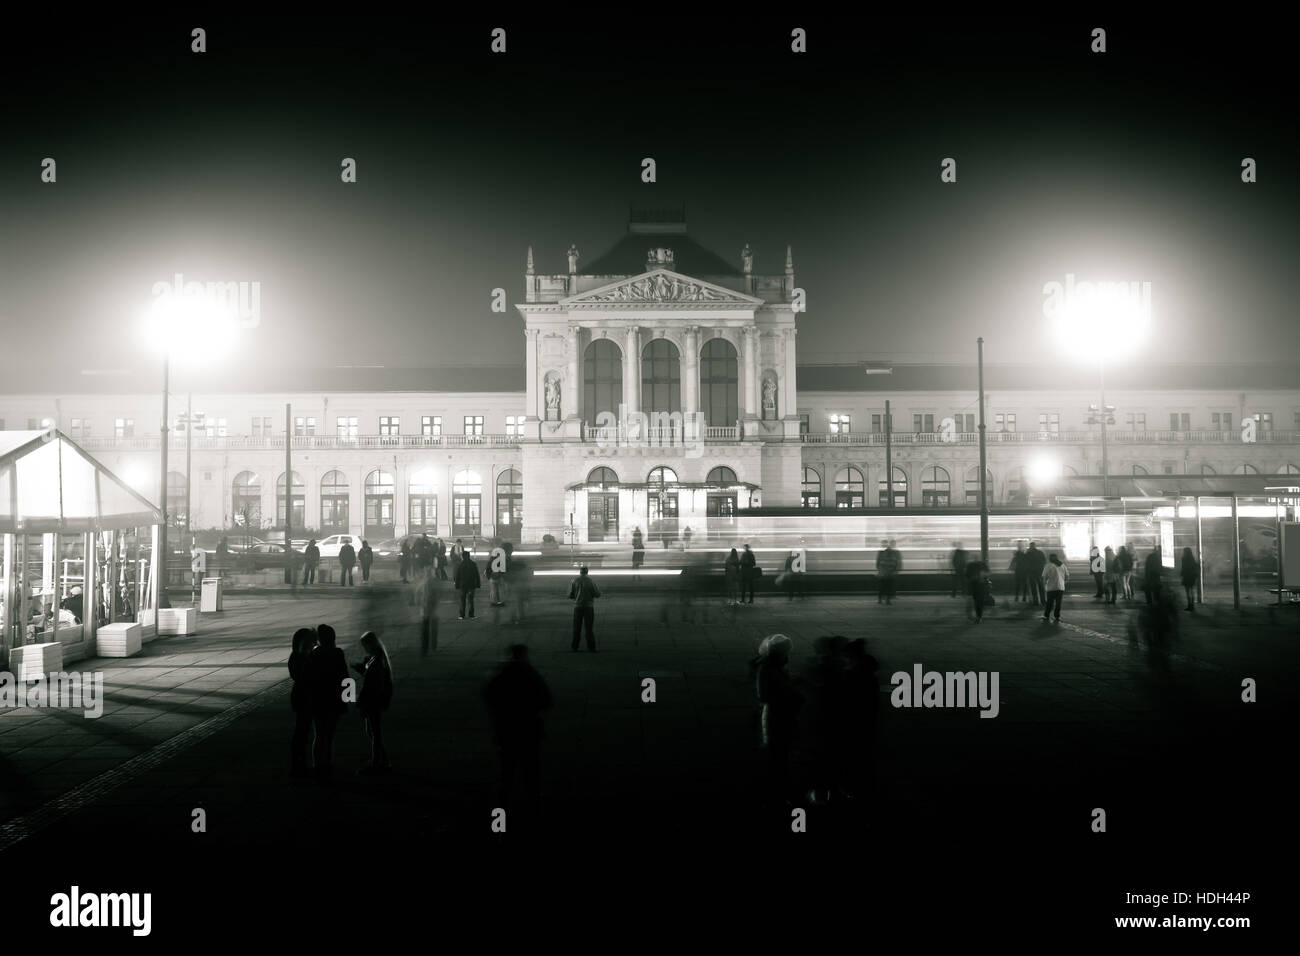 Zagreb central station black and white view, capital of Croatia Stock Photo